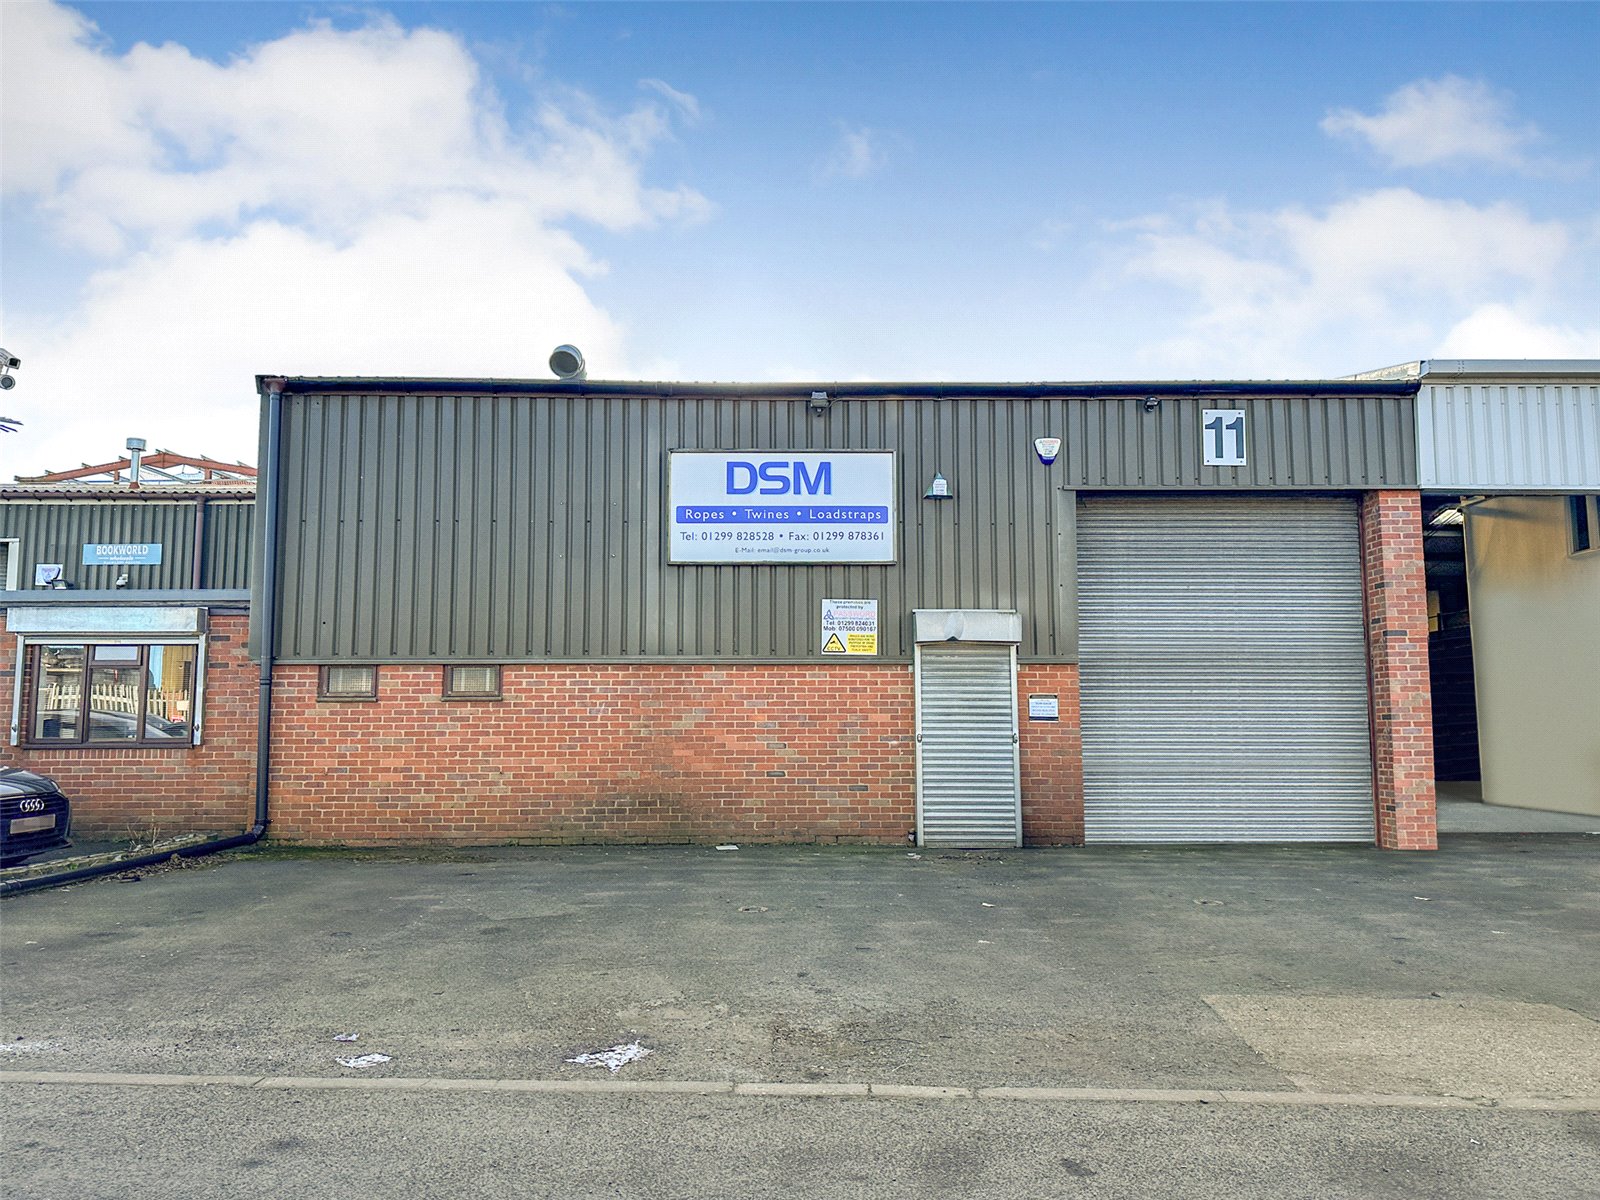 Sandy Lane Industrial Estate, Stourport-on-Severn, Worcestershire, DY13